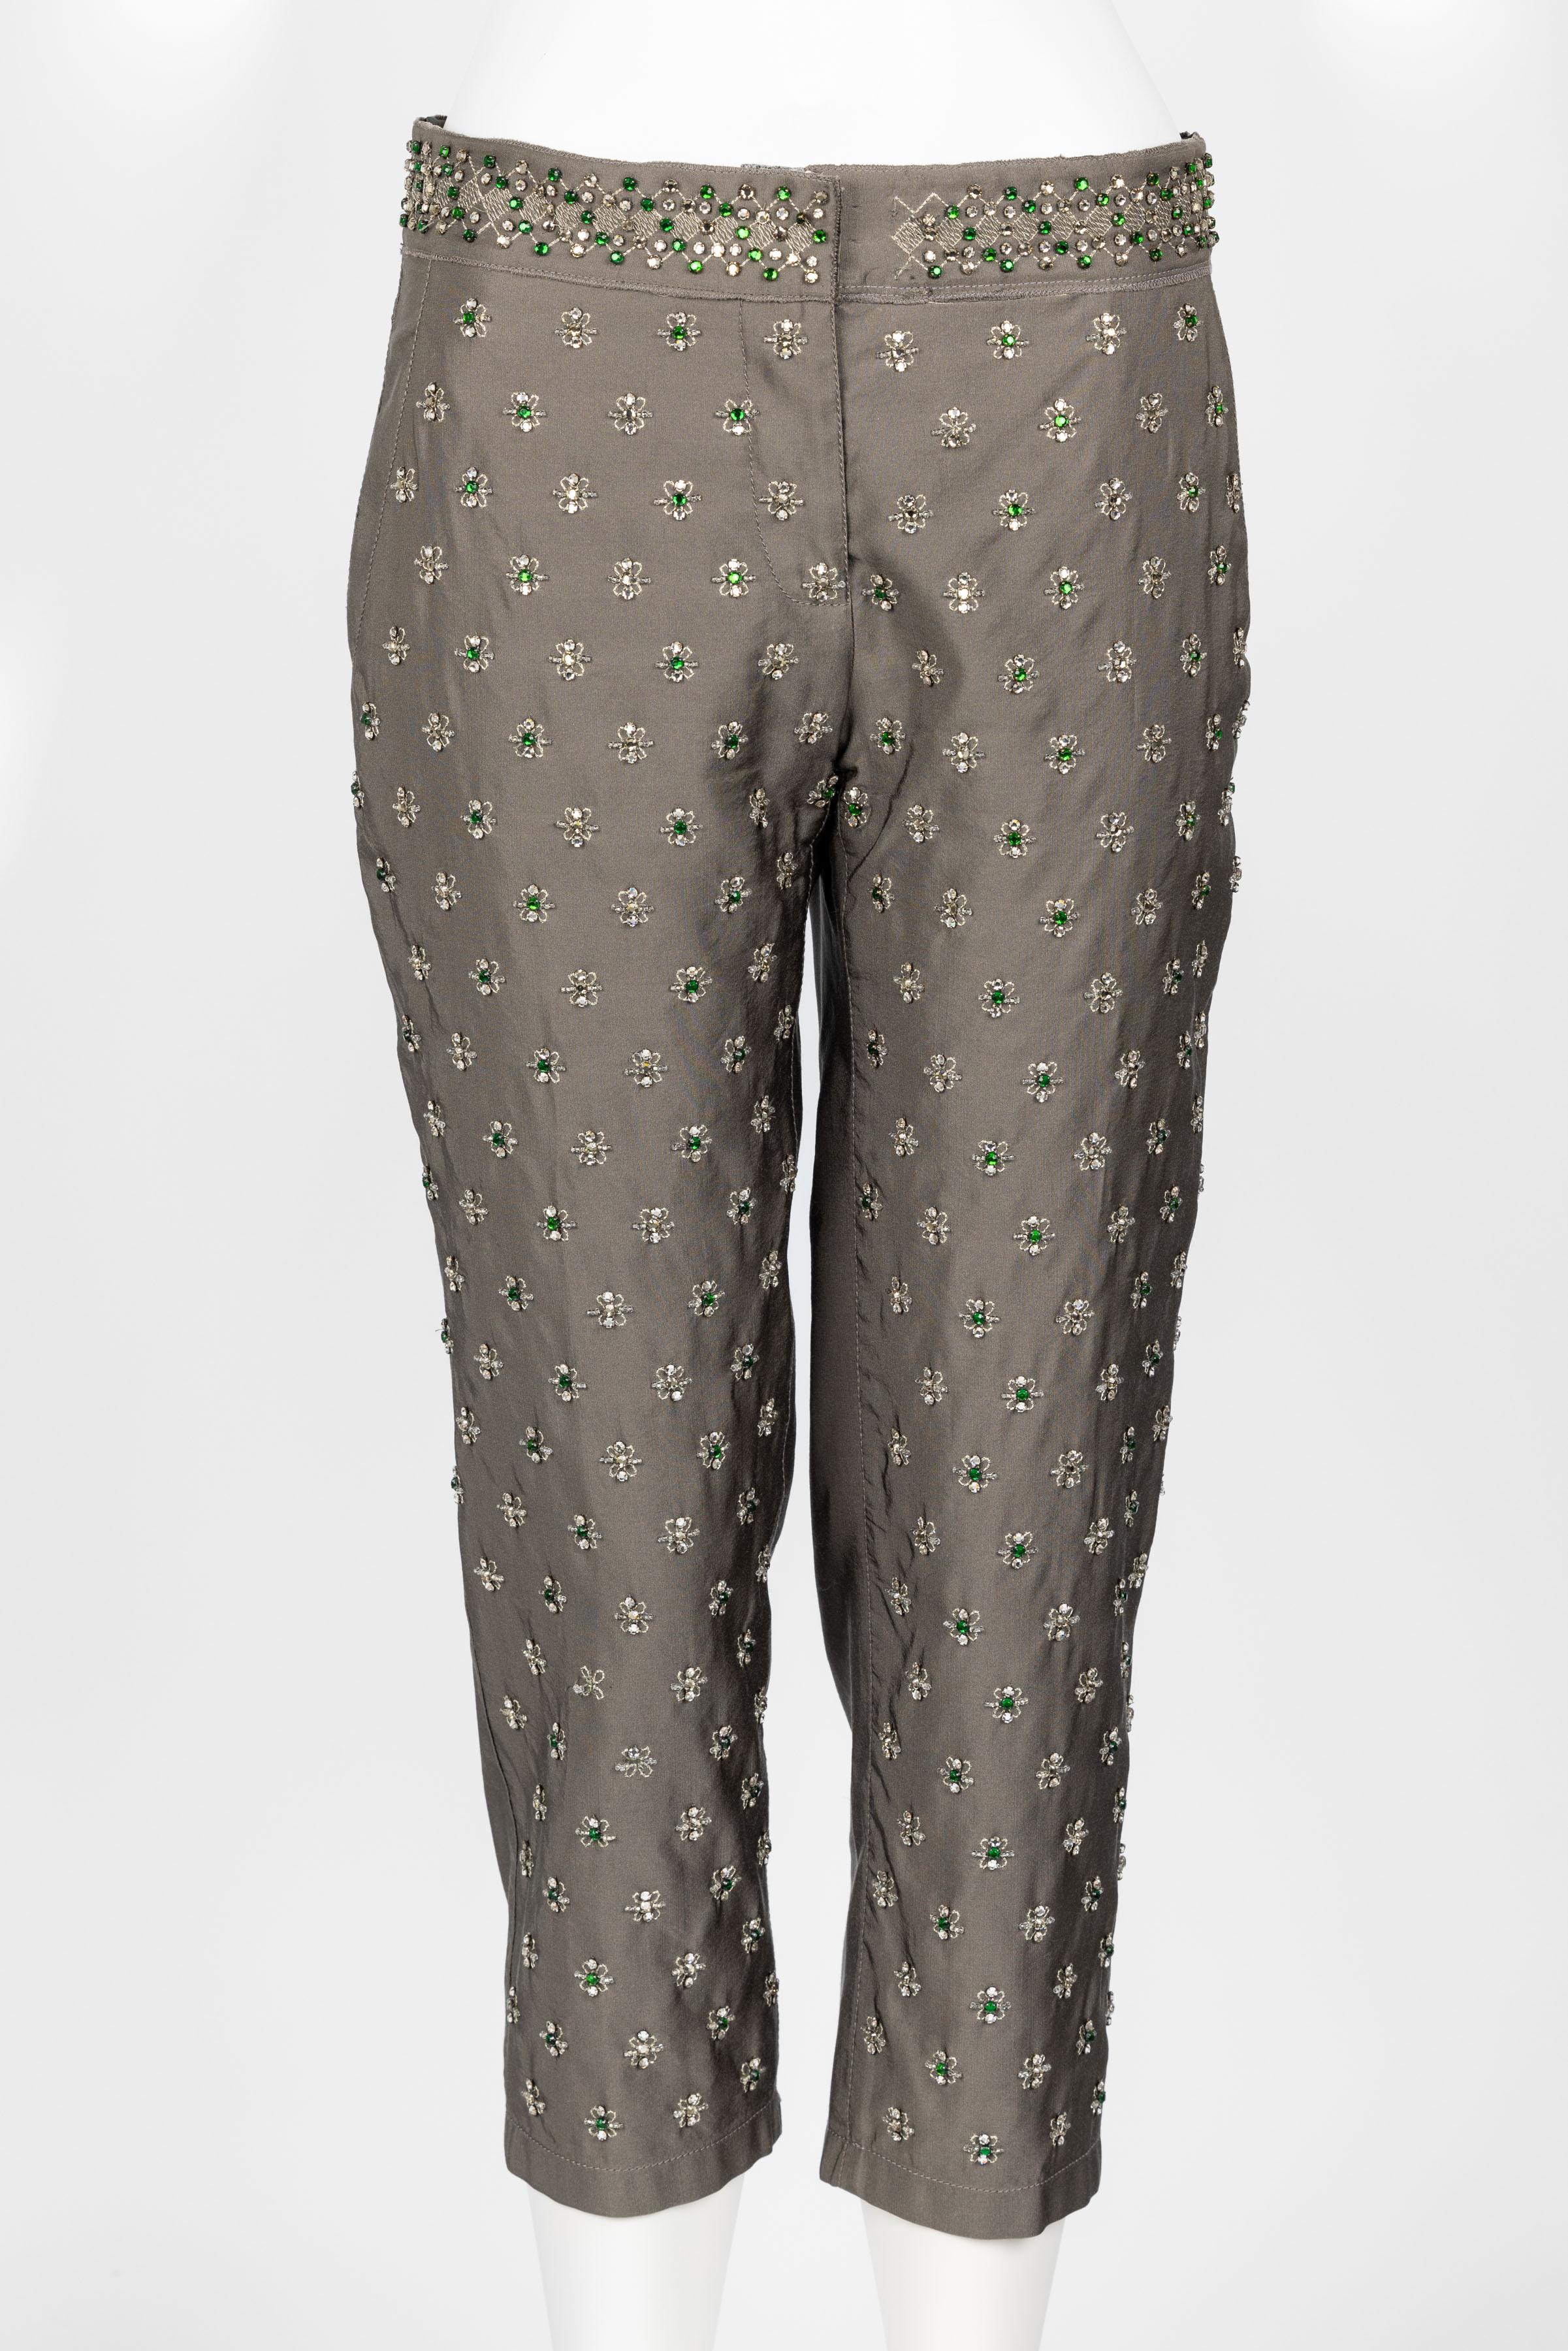 Prada F/W 2004 Crystal Embellished Silk Capri Pants Limited Edition In Good Condition For Sale In Boca Raton, FL